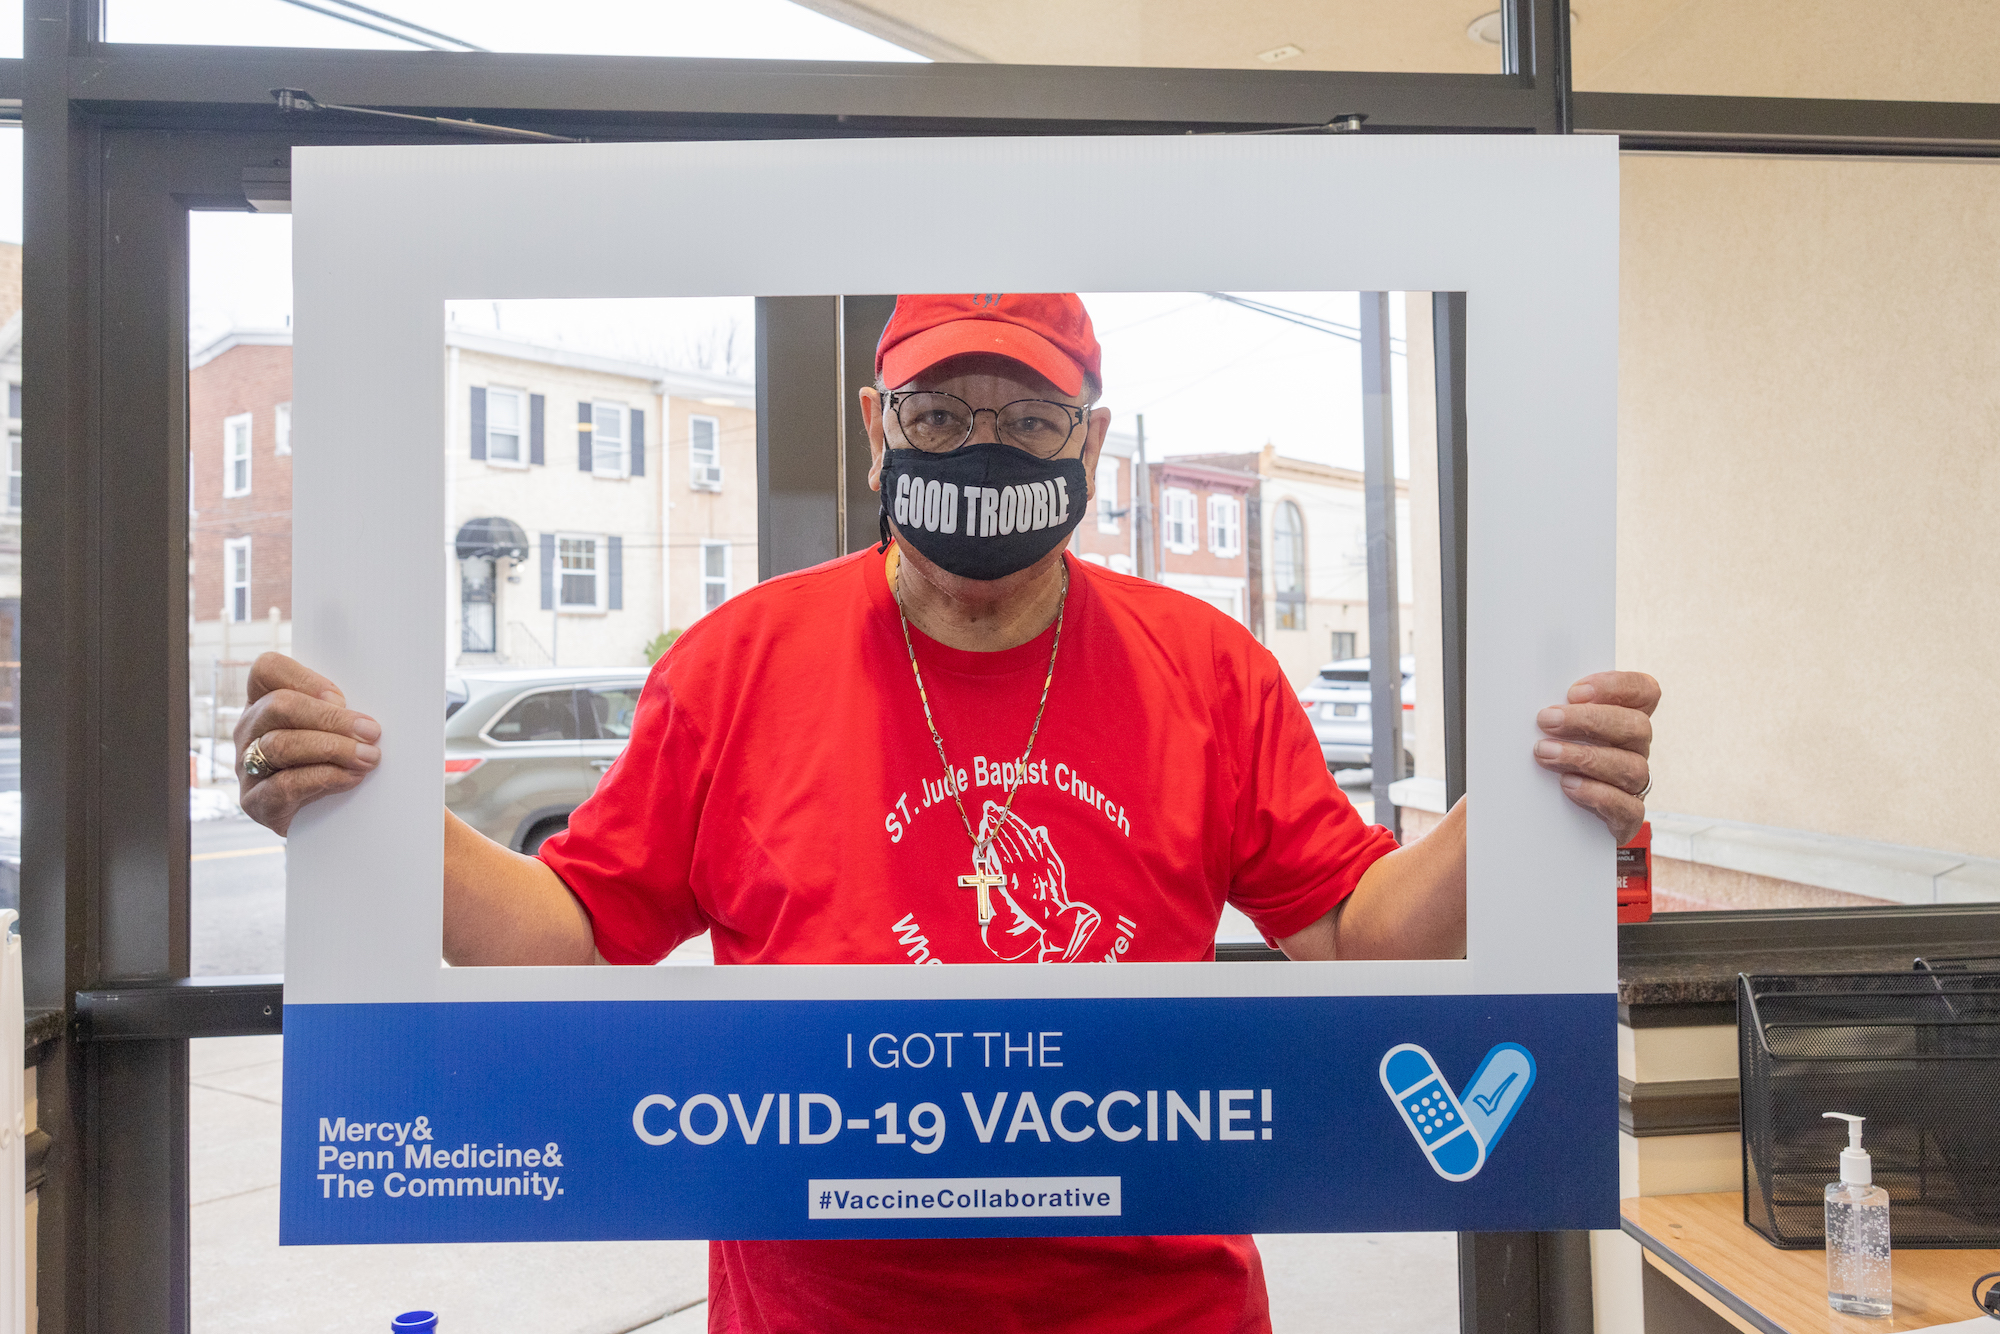 Masked person holds up photo border that reads "I got the COVID-19 vaccine!"